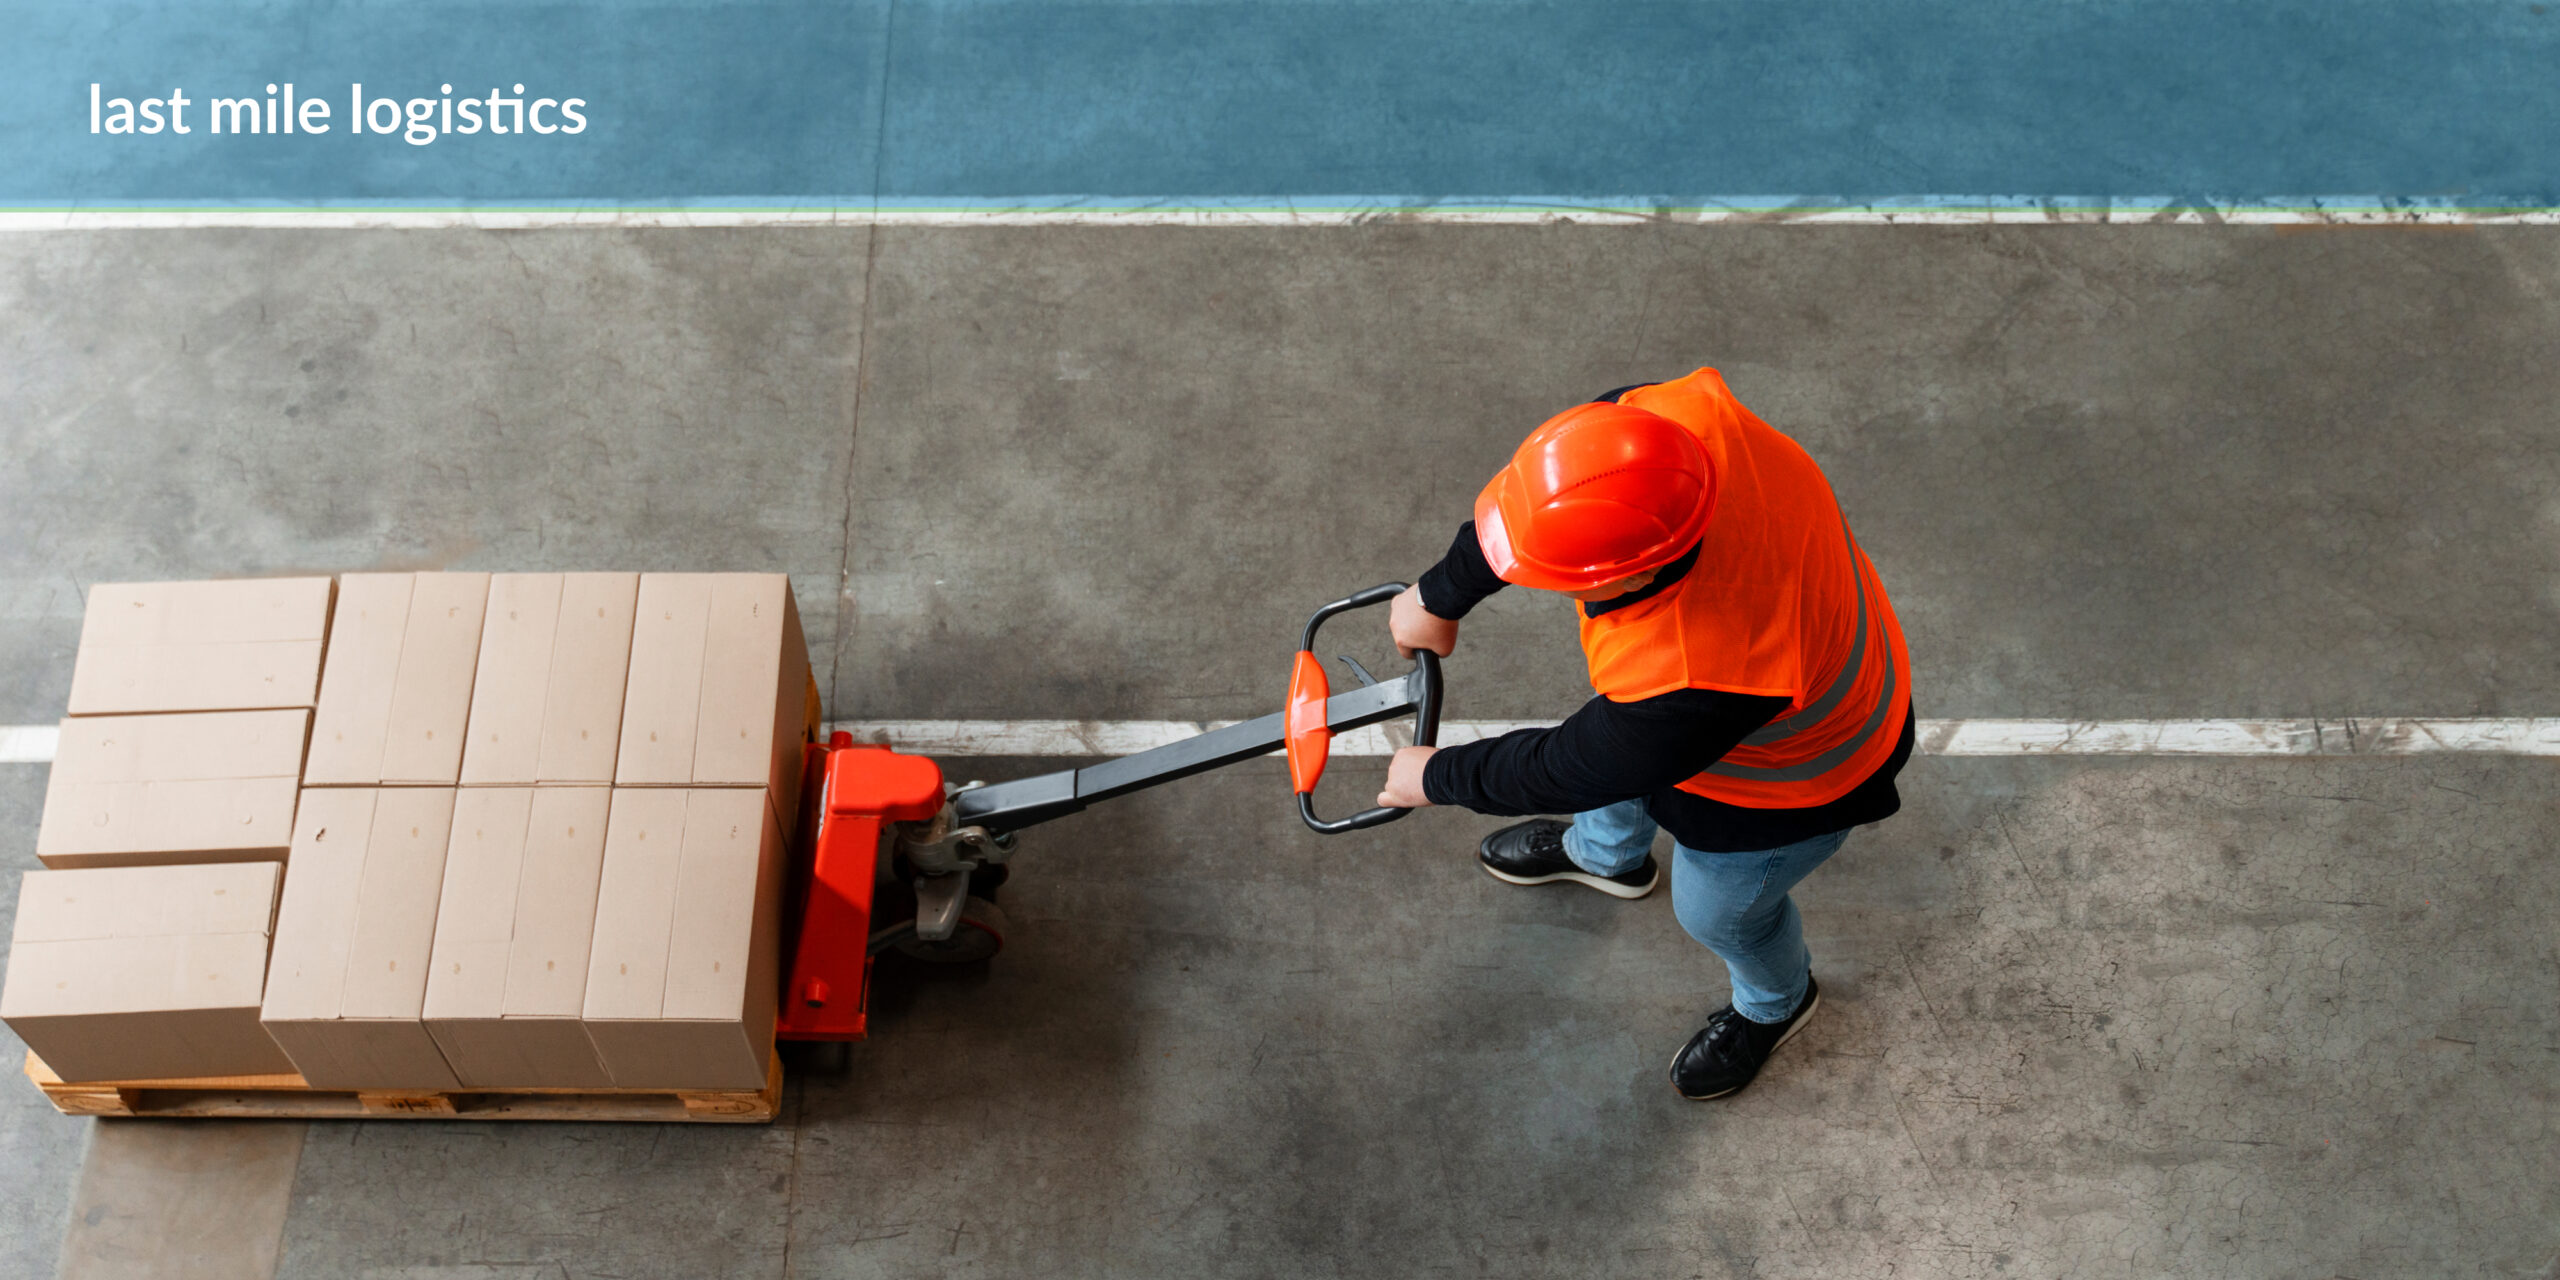 A worker in an orange safety vest and helmet using a manual pallet jack to move a stack of cardboard boxes on a wooden pallet, with the text 